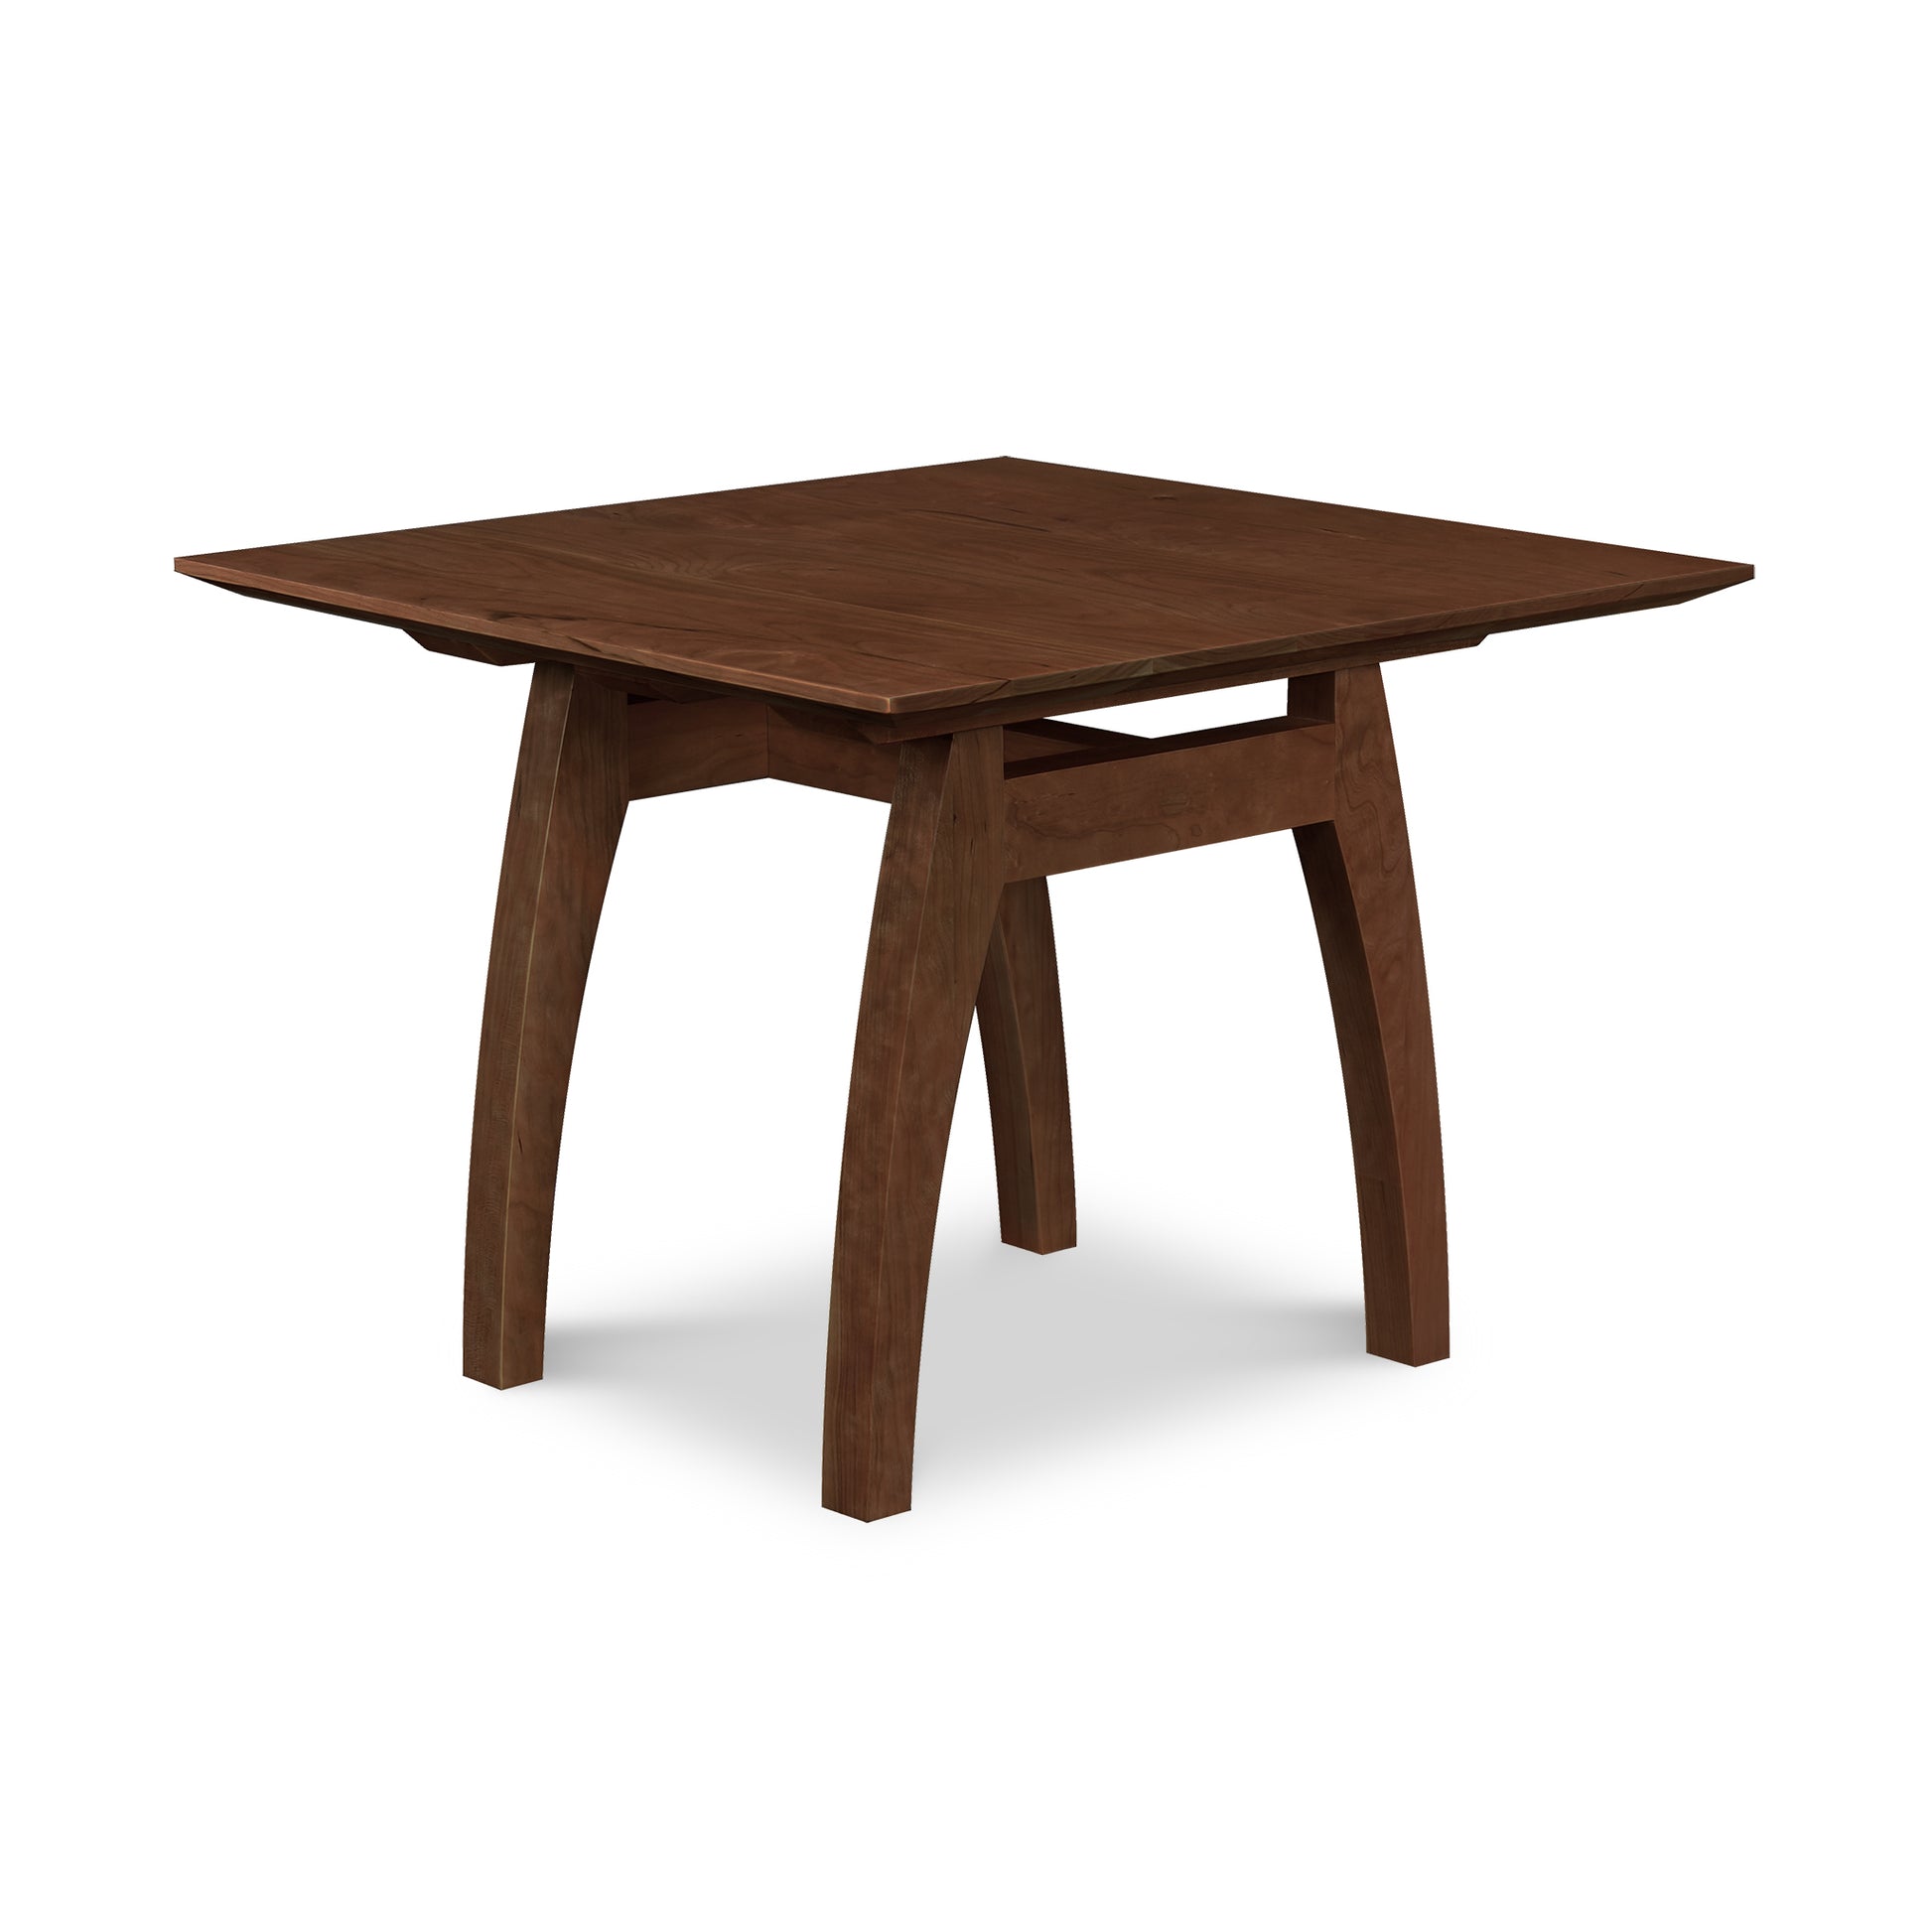 A Vermont Modern Trestle End Table by Lyndon Furniture, sustainable wood square table with modern style legs.